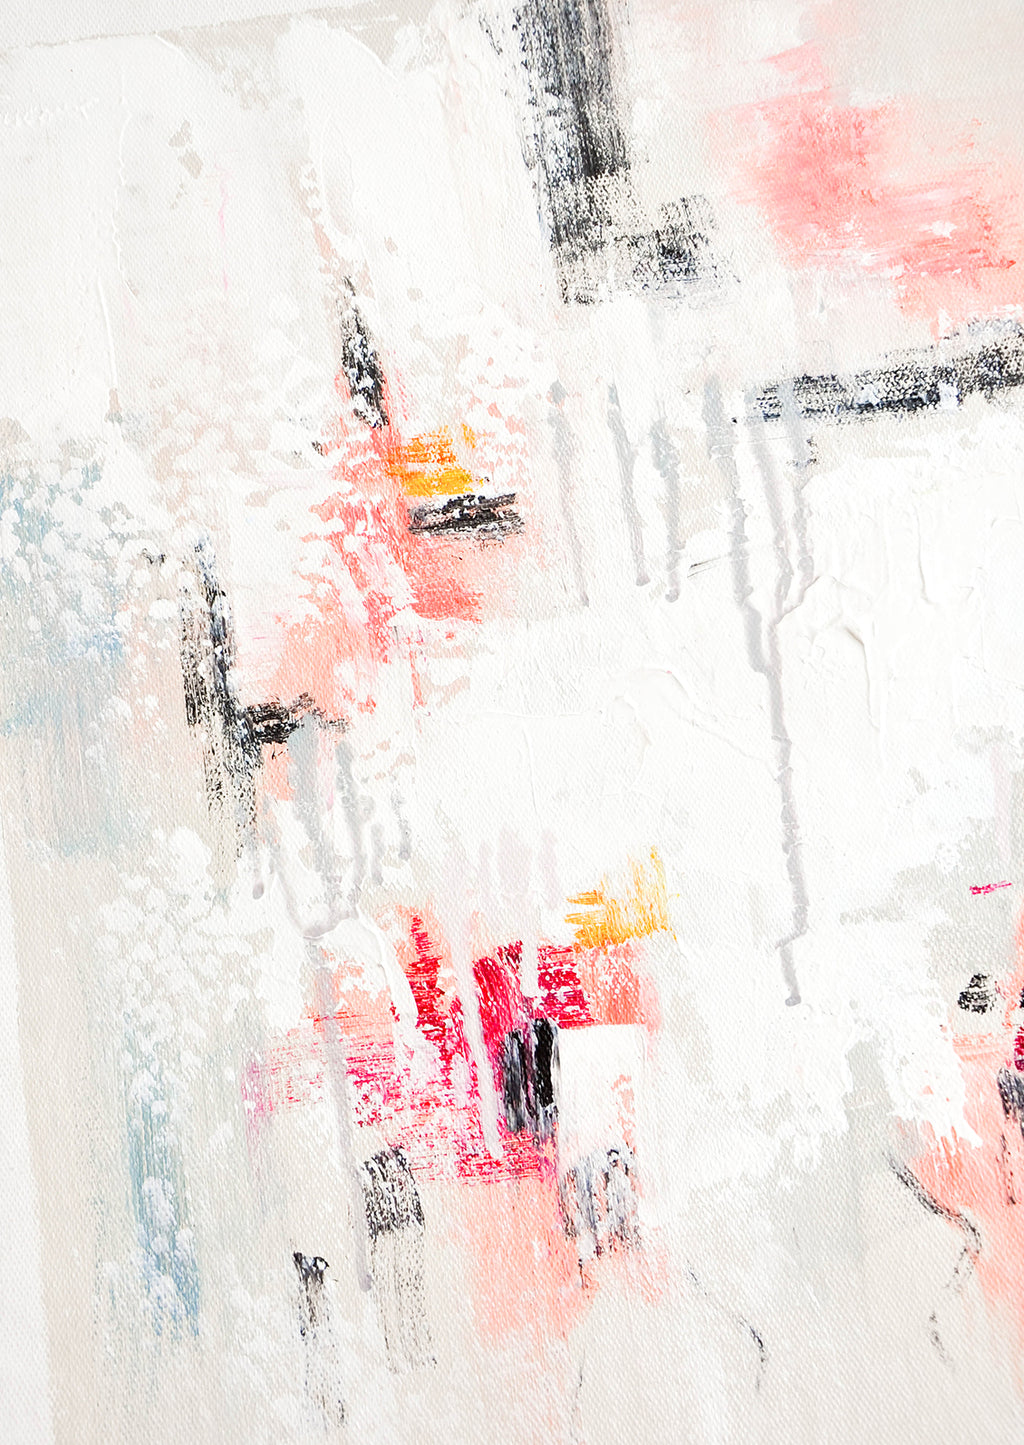 2: A close up of an abstract white, pink, and gray painting.